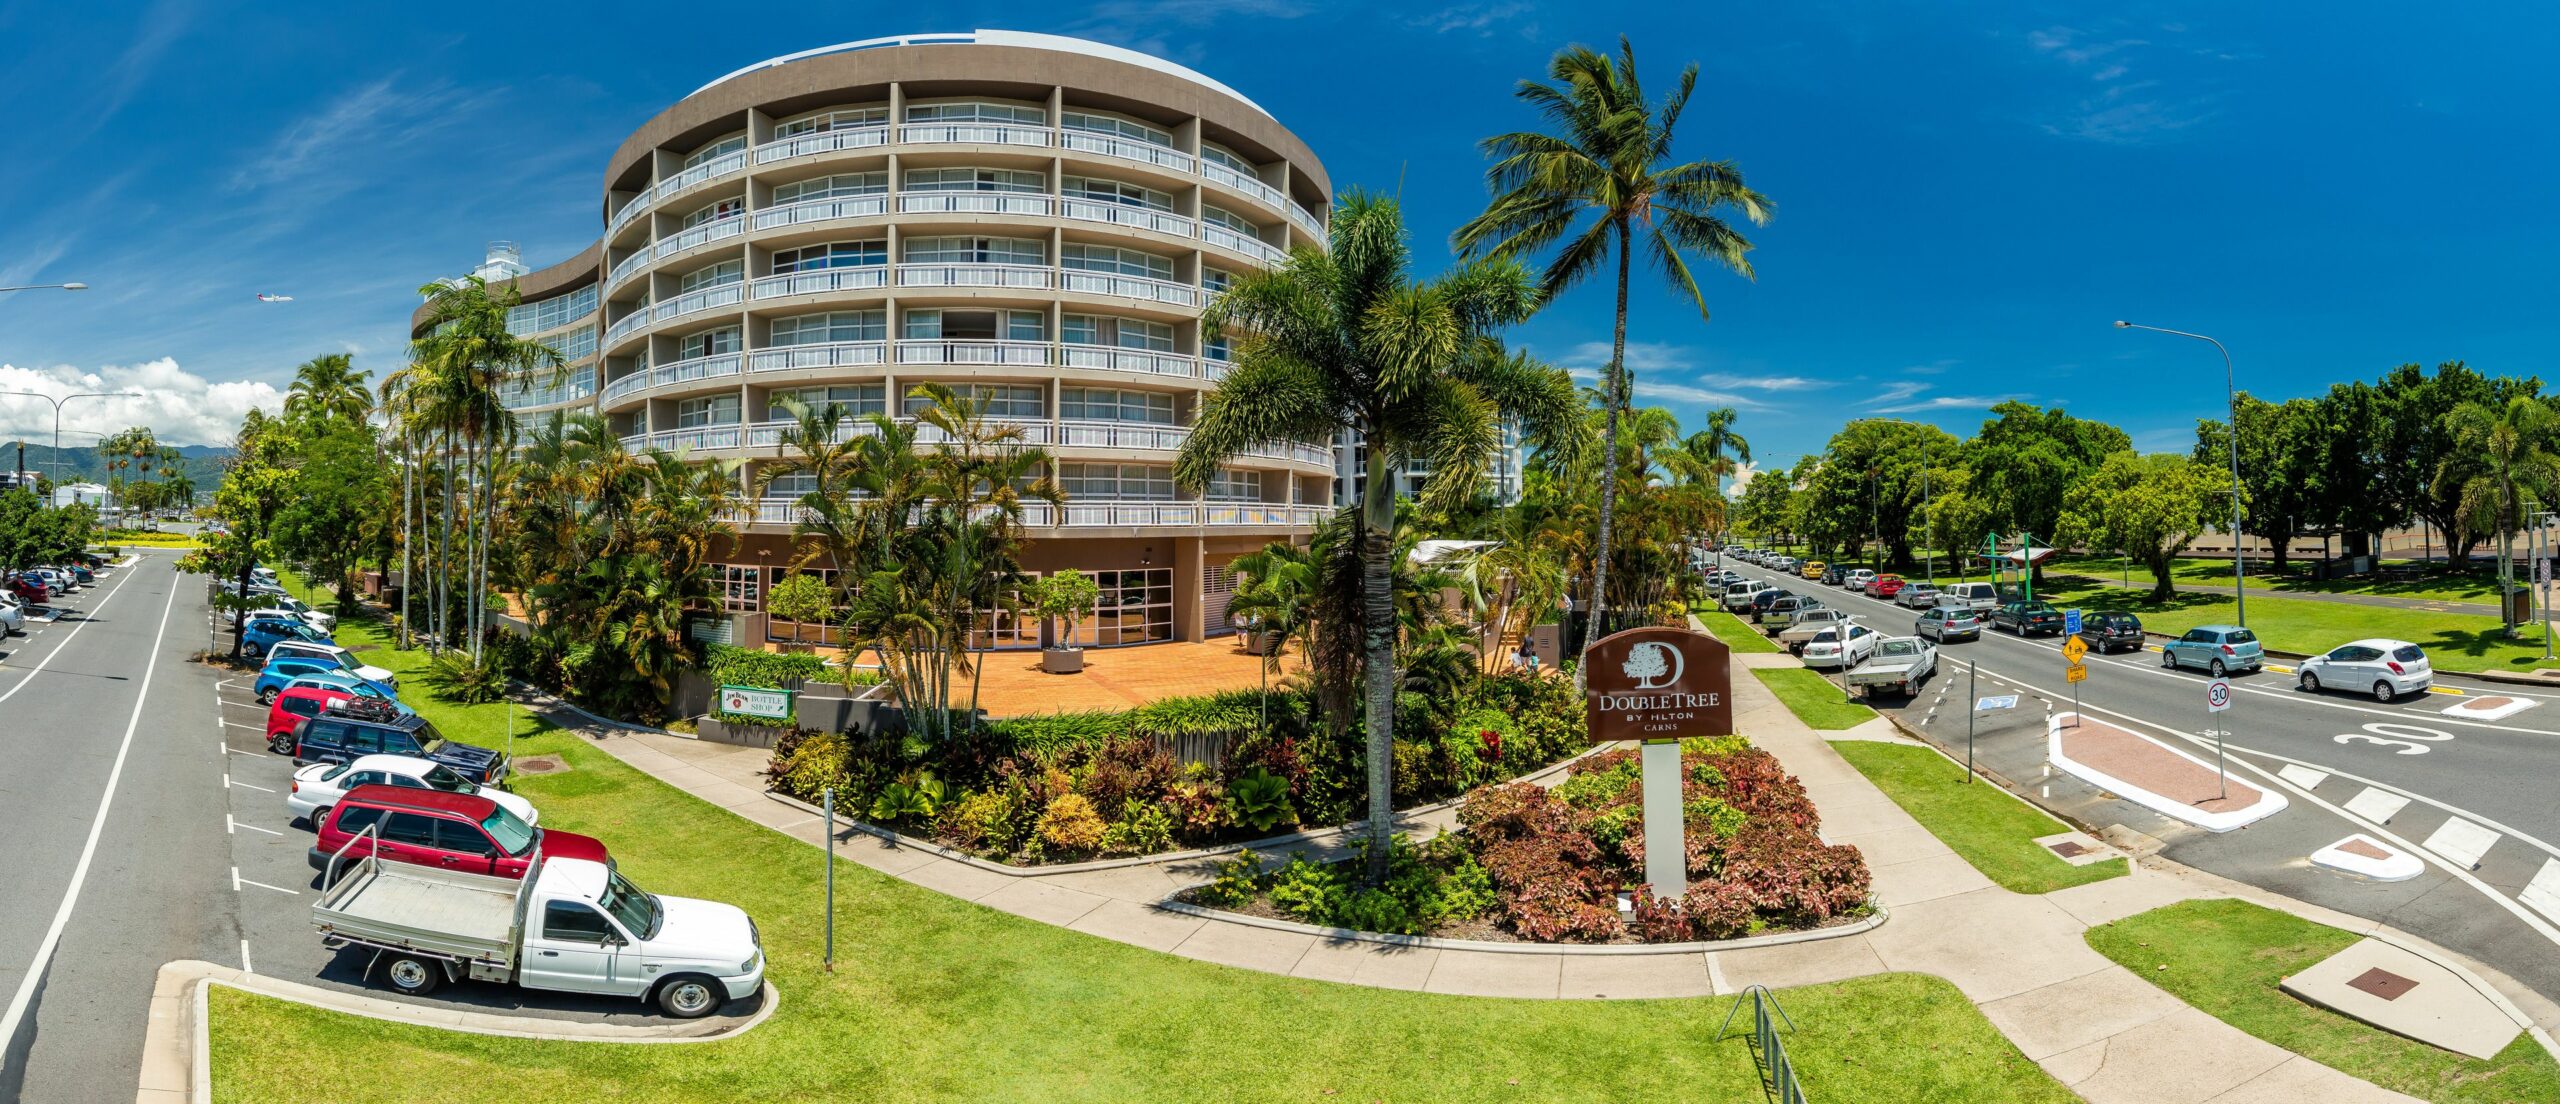 DoubleTree by Hilton Hotel Cairns